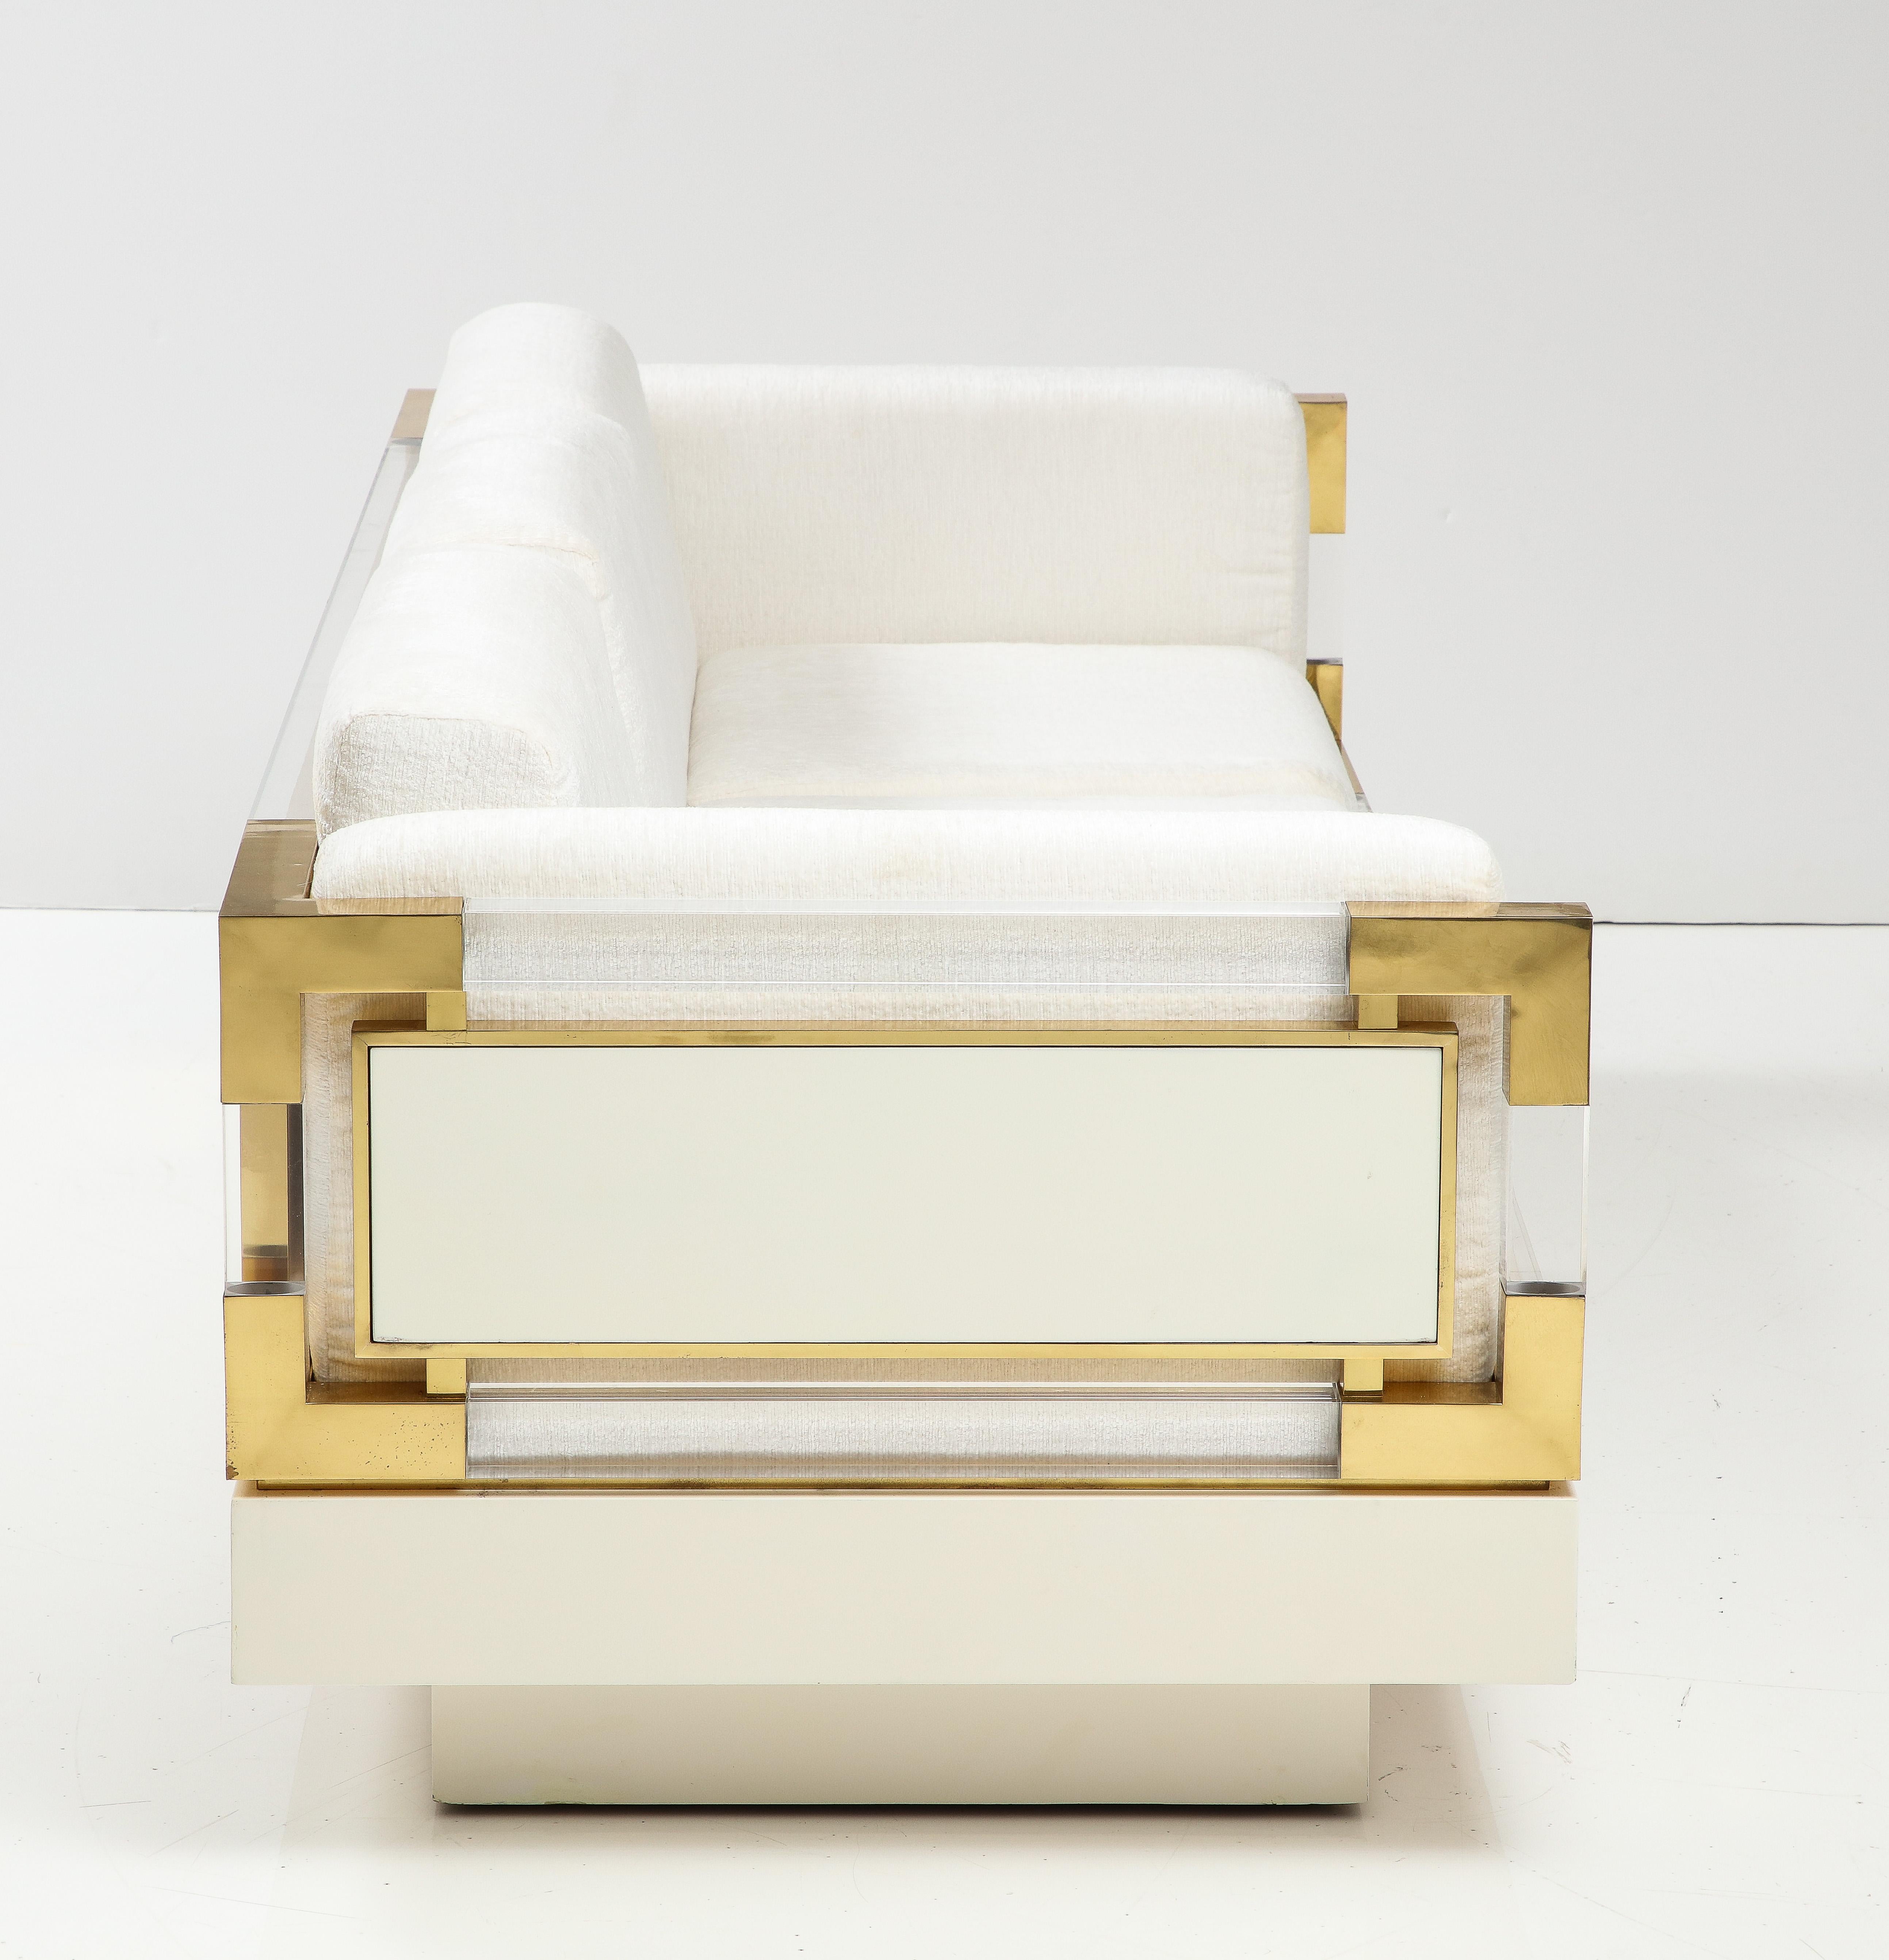 Late 20th Century Rare Italian 1980's Lucite and Brass Sofa by Fabian For Sale